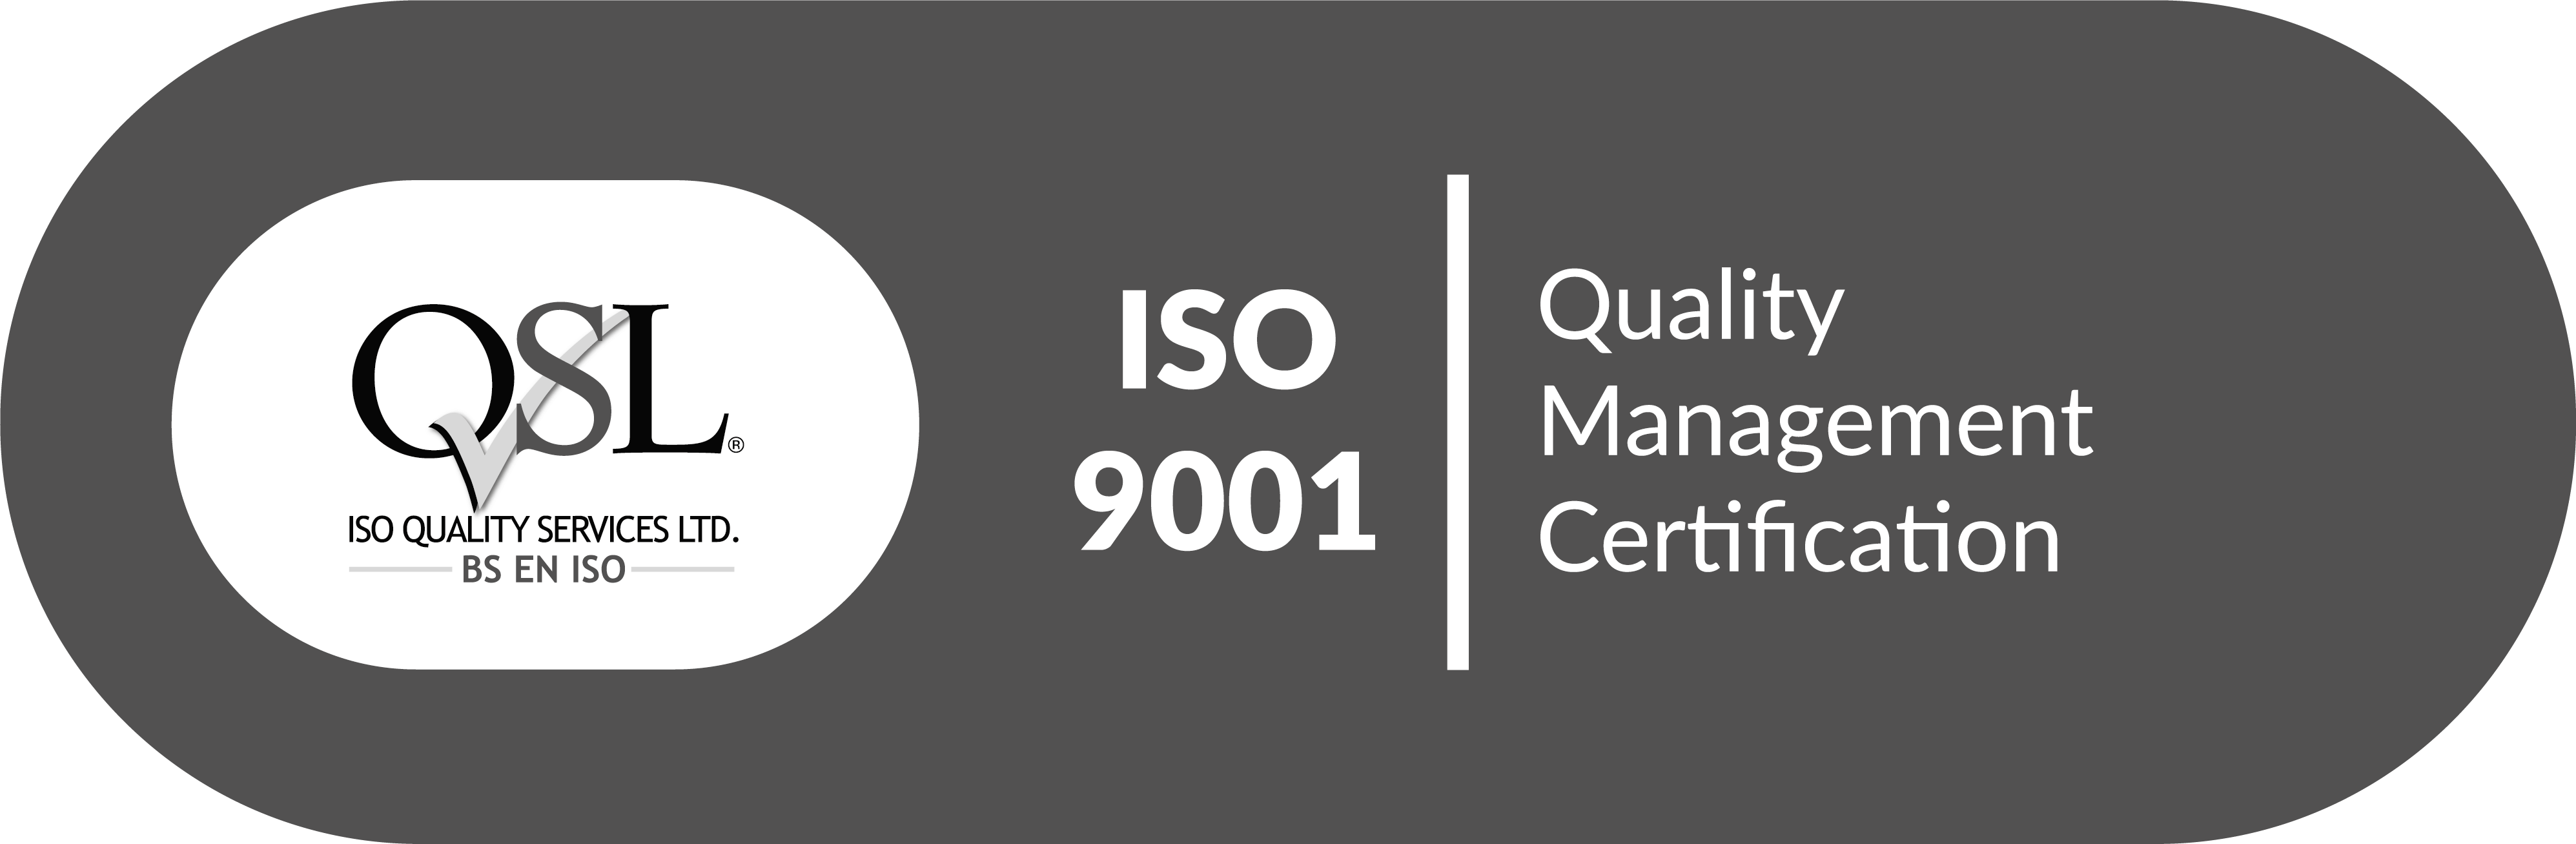 ISO 9001 Quality Management Certification badge